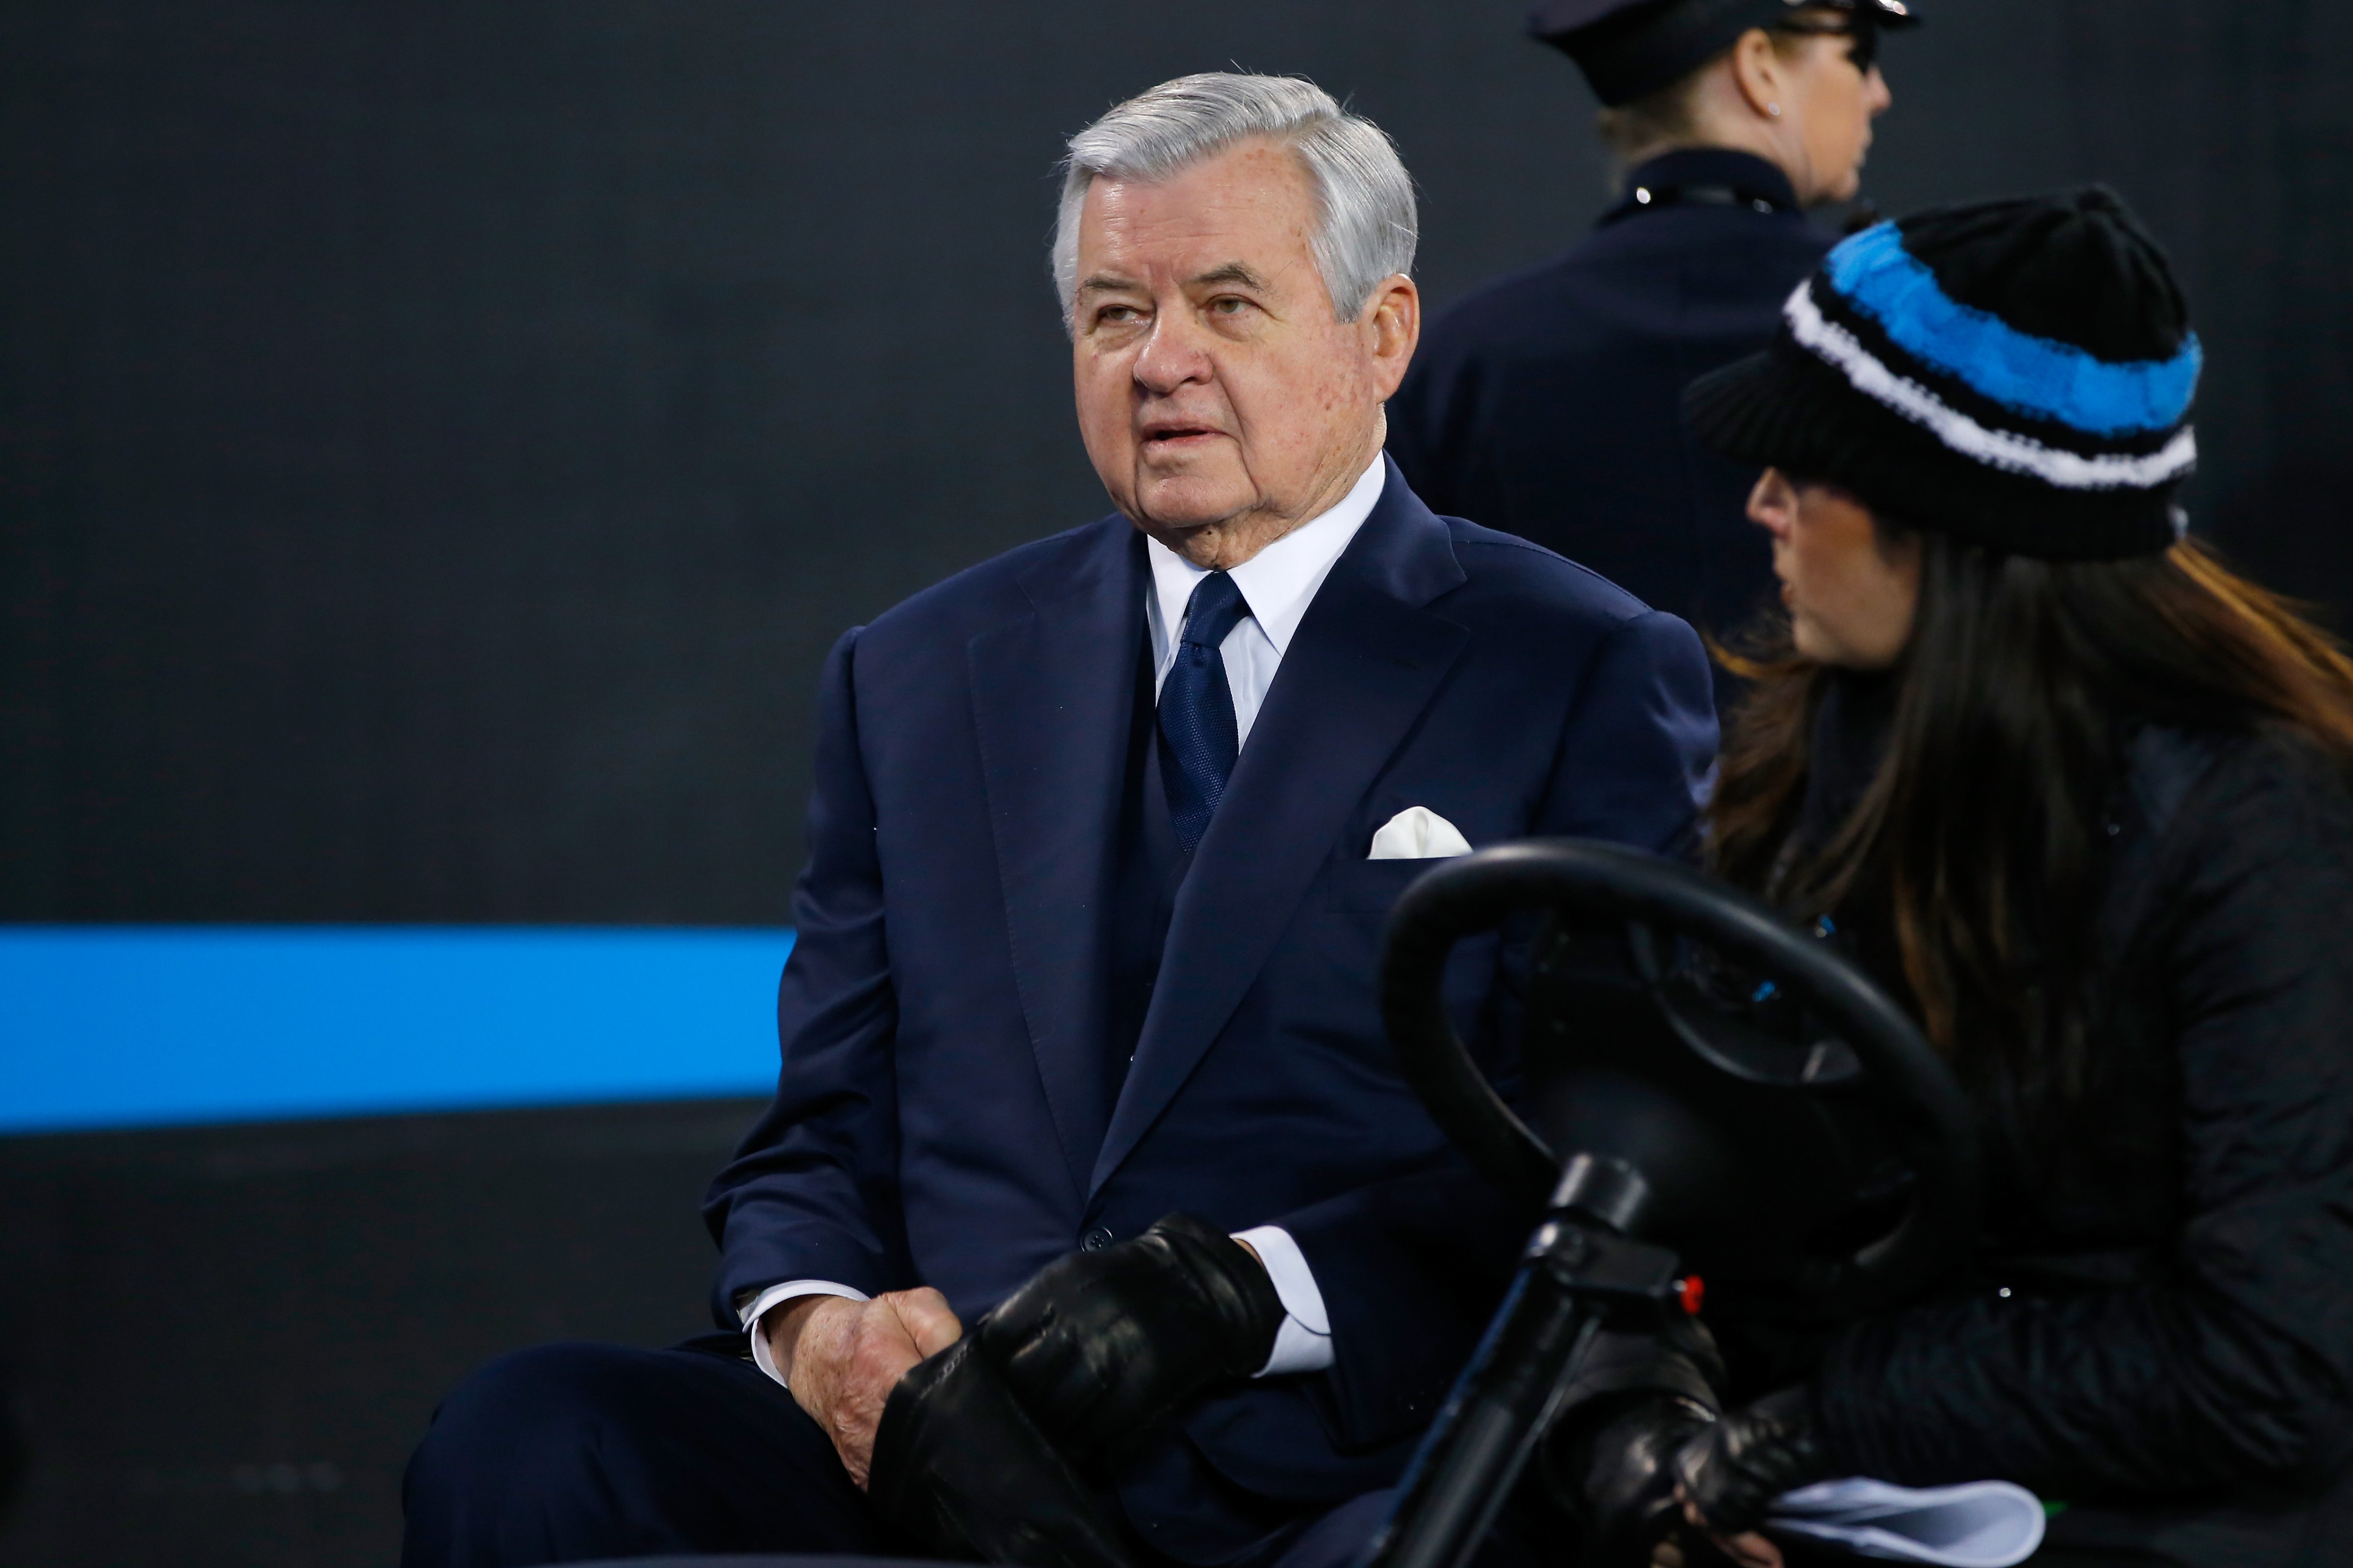 Carolina Panthers owner Jerry Richardson looks on prior to the NFC Championship Game between the Arizona Cardinals and the Carolina Panthers at Bank of America Stadium on January 24, 2016 in Charlotte, North Carolina. (Kevin C. Cox—Getty Images)